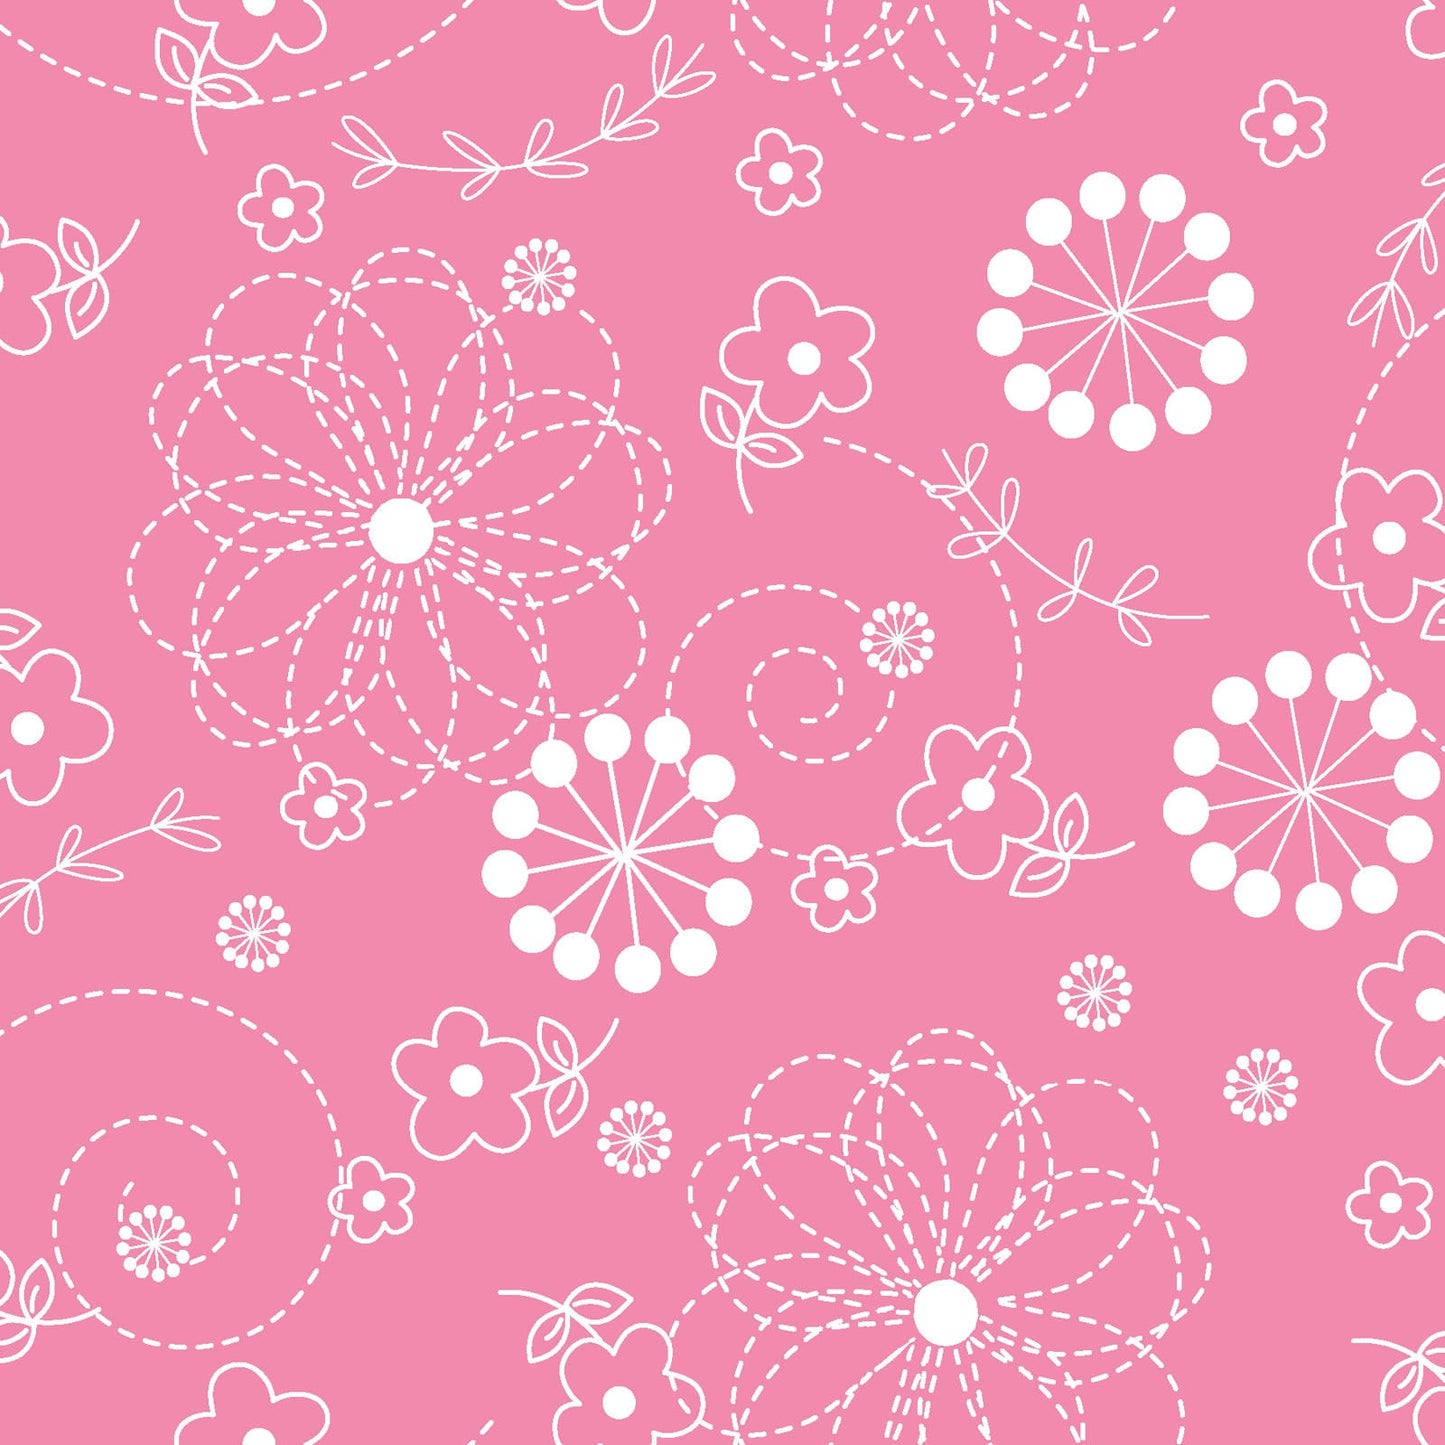 White on Pink Doodles is part of the Kimberbell Basics line designed by Kim Christopherson for Maywood Studio. This fabric features white, Pin-stitched flowers and dandelion bursts on a pink background.